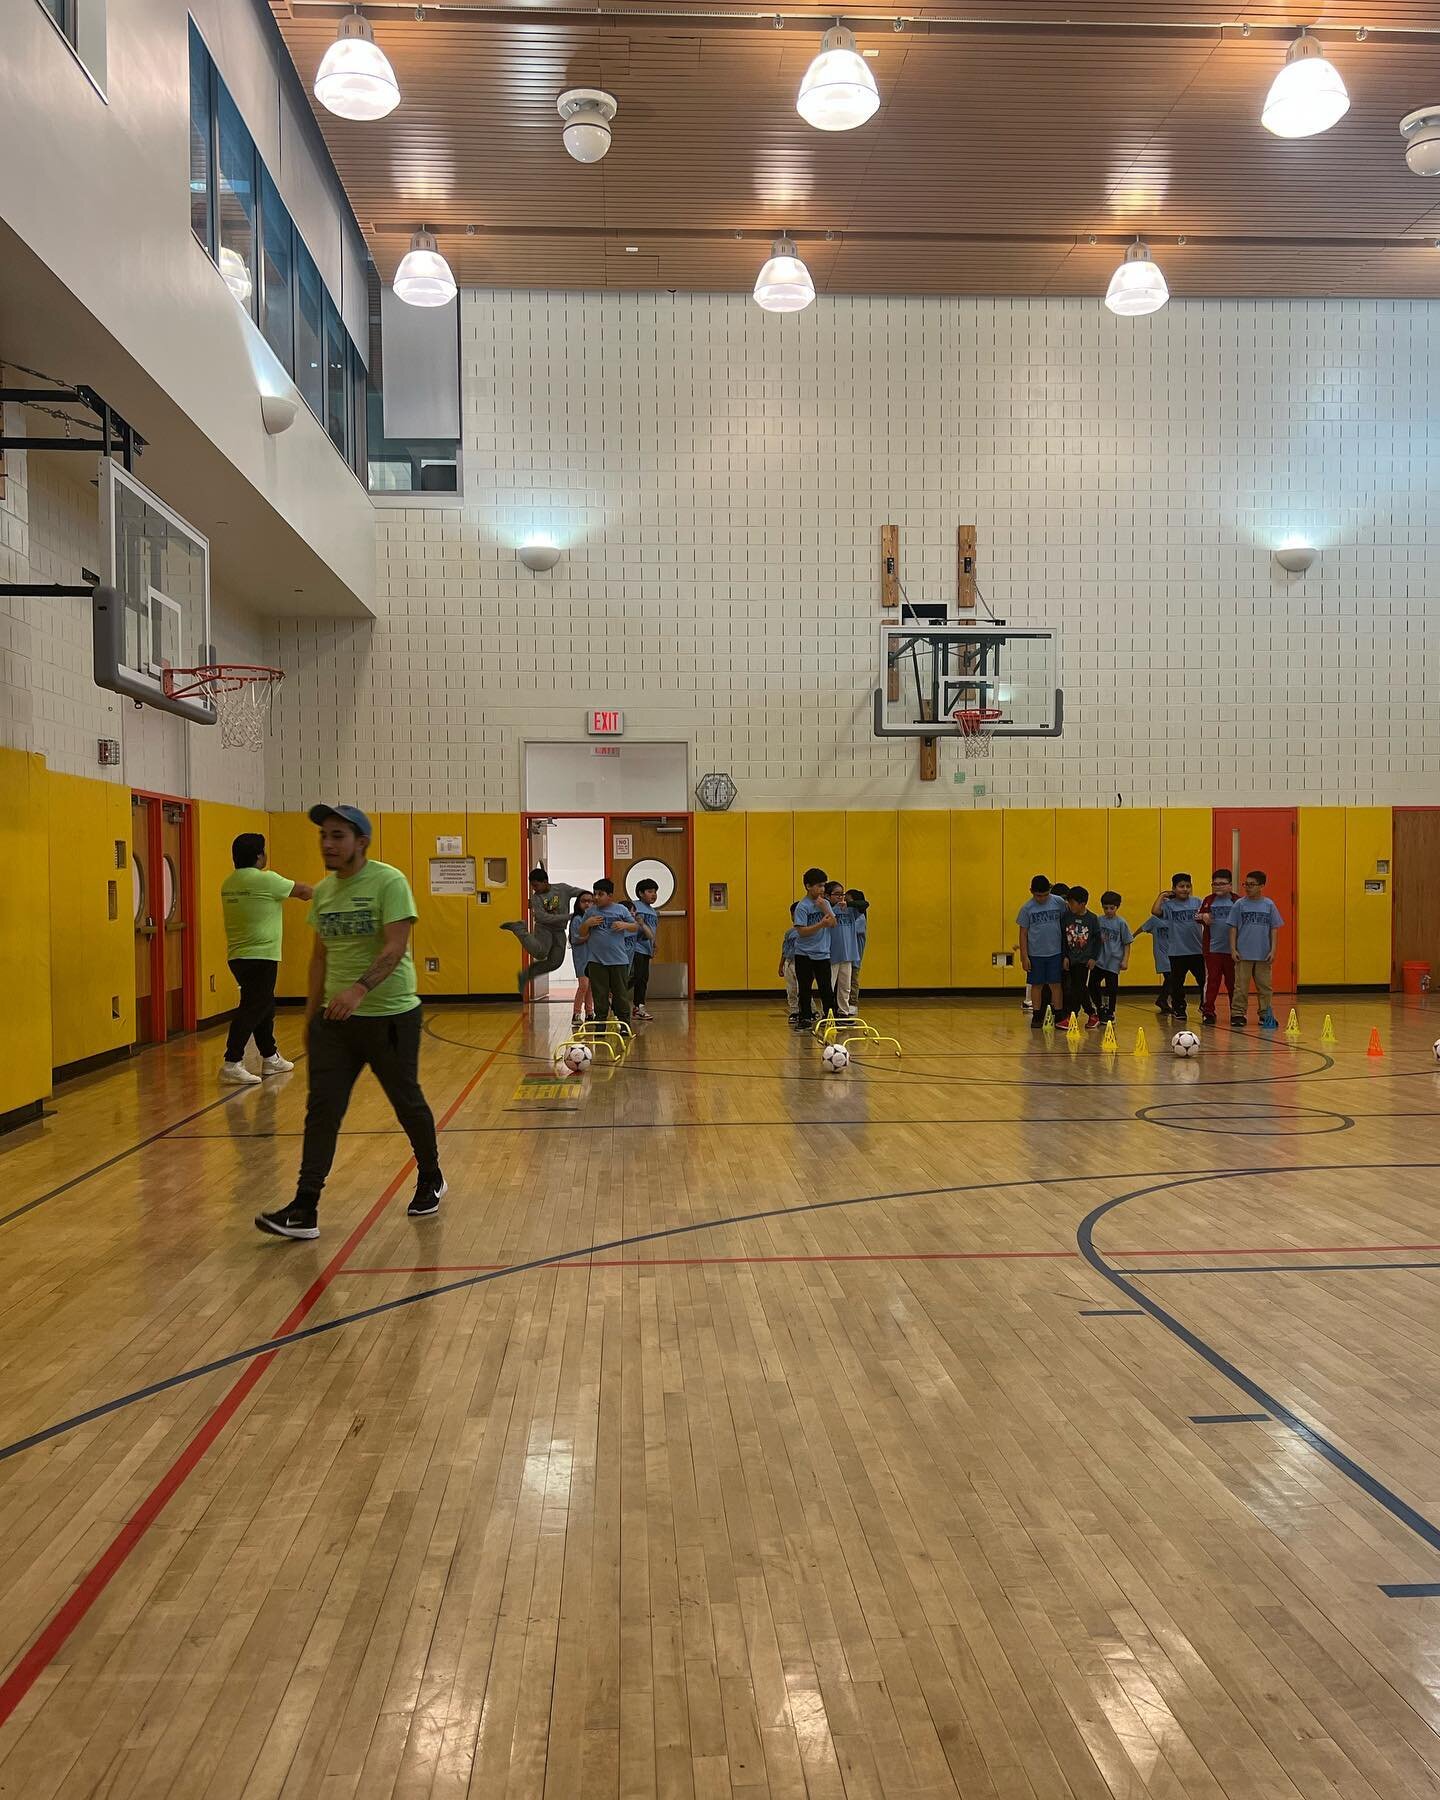 Our second session for the Sports for Families program has started!

&iexcl;Comenz&oacute; nuestra segunda sesi&oacute;n del programa Deportes para Familias!

#soccer #basketball #volunteer #community #togetherwecan #togetherwecanrc #youth #sportsfor